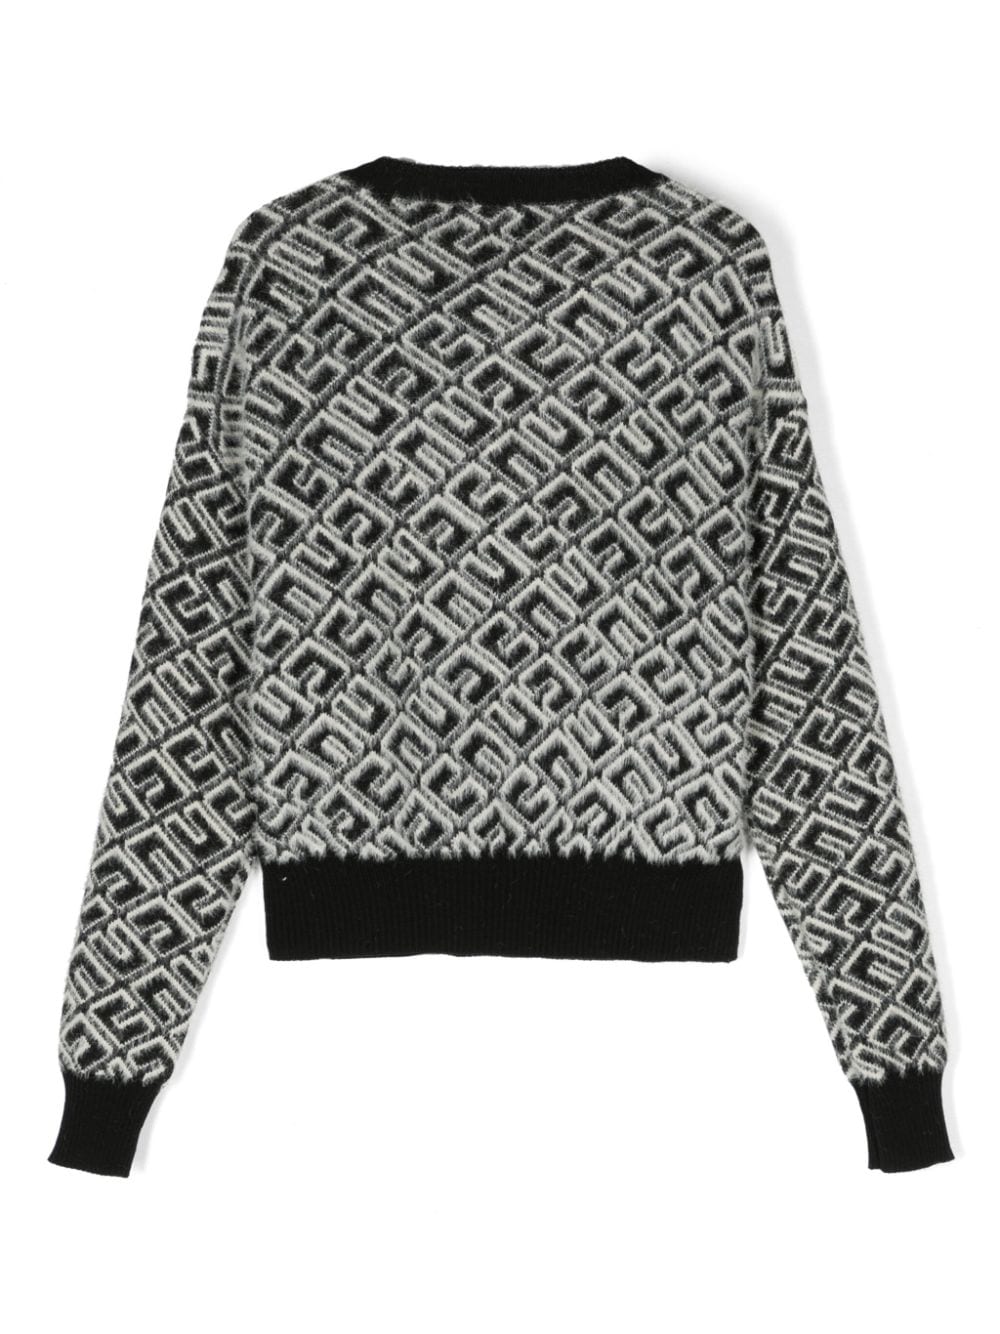 Black and white sweater for girls